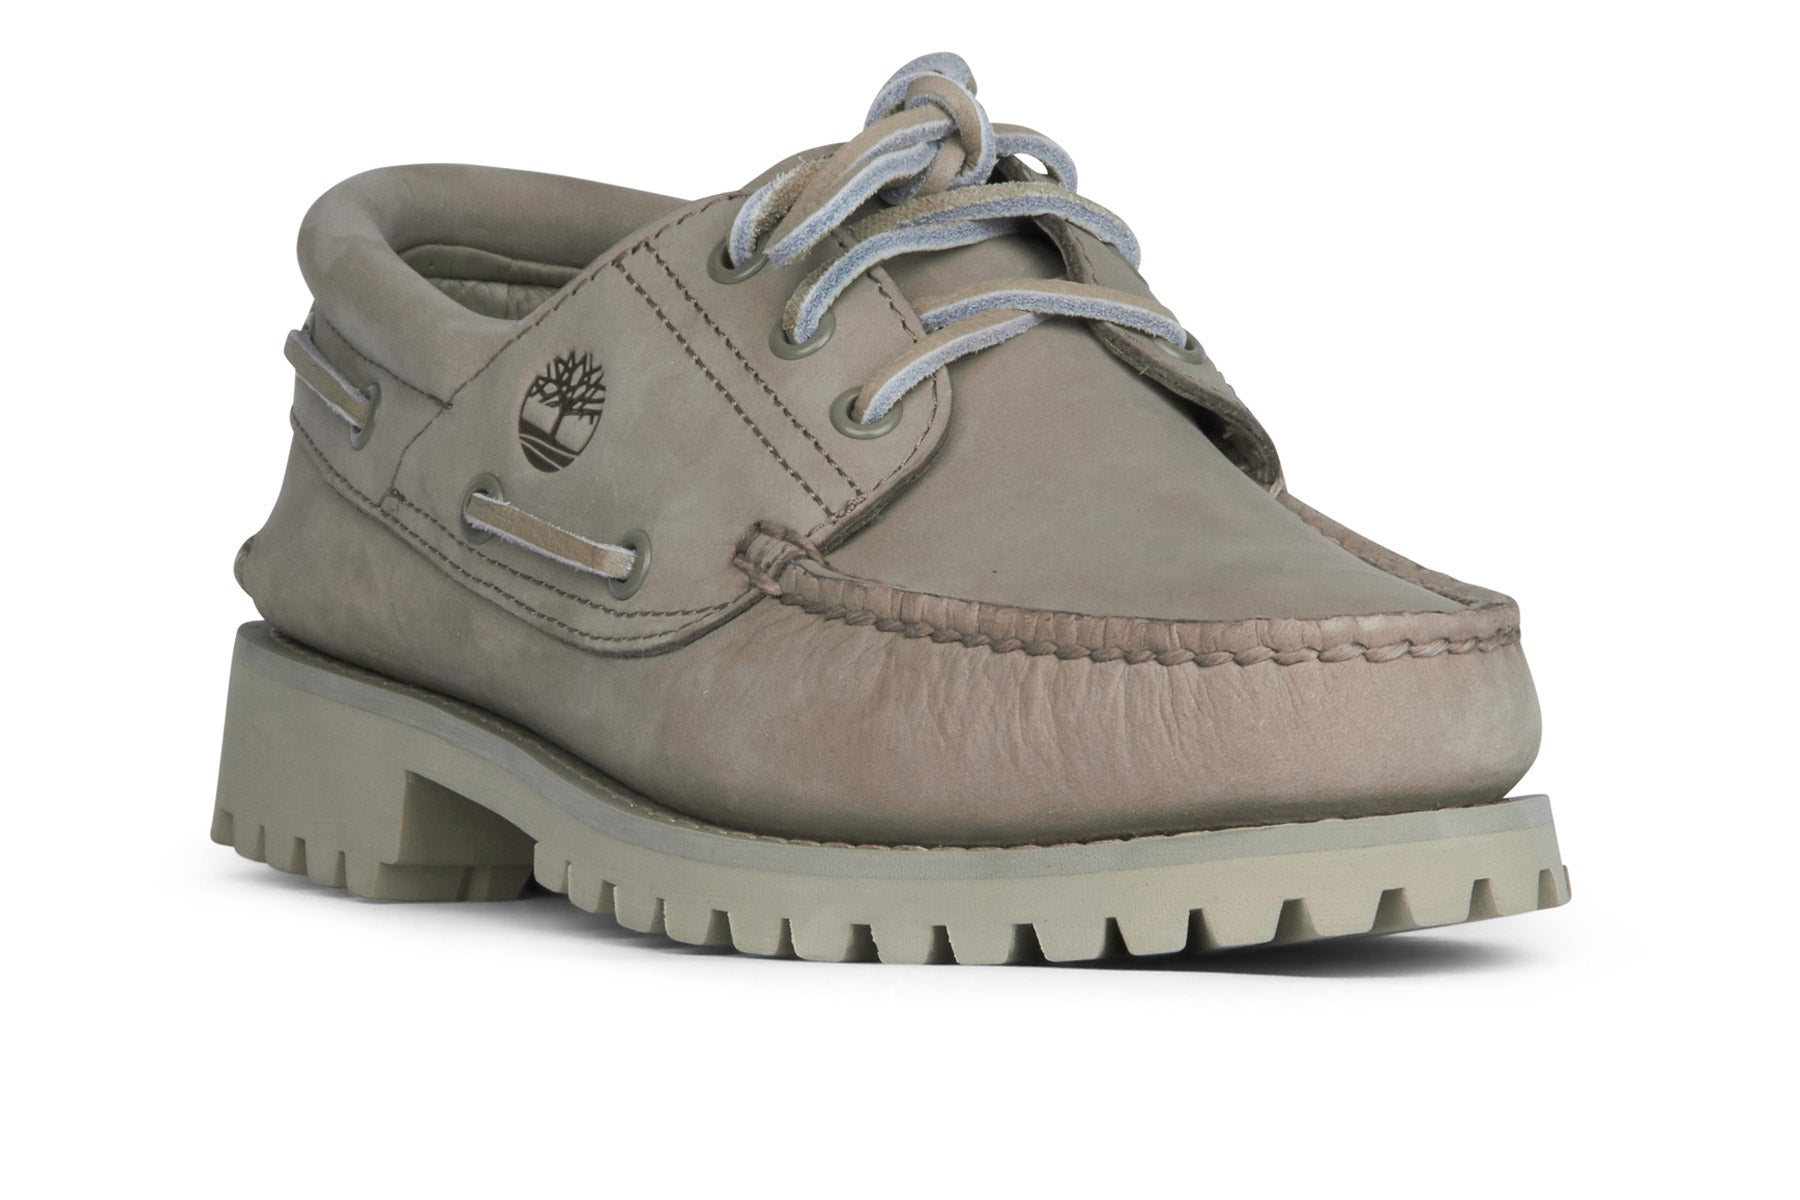 Timberland Authentics Lace Up Boat Shoe - Light Taupe